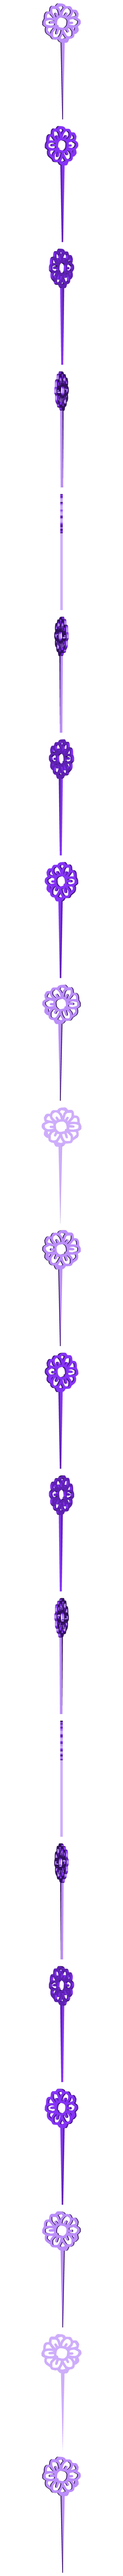 flower3_3dprintNY.stl Download free STL file Spring Flower, Butterfy and Bee Multi Purpose Picks • 3D printable template, barb_3dprintny